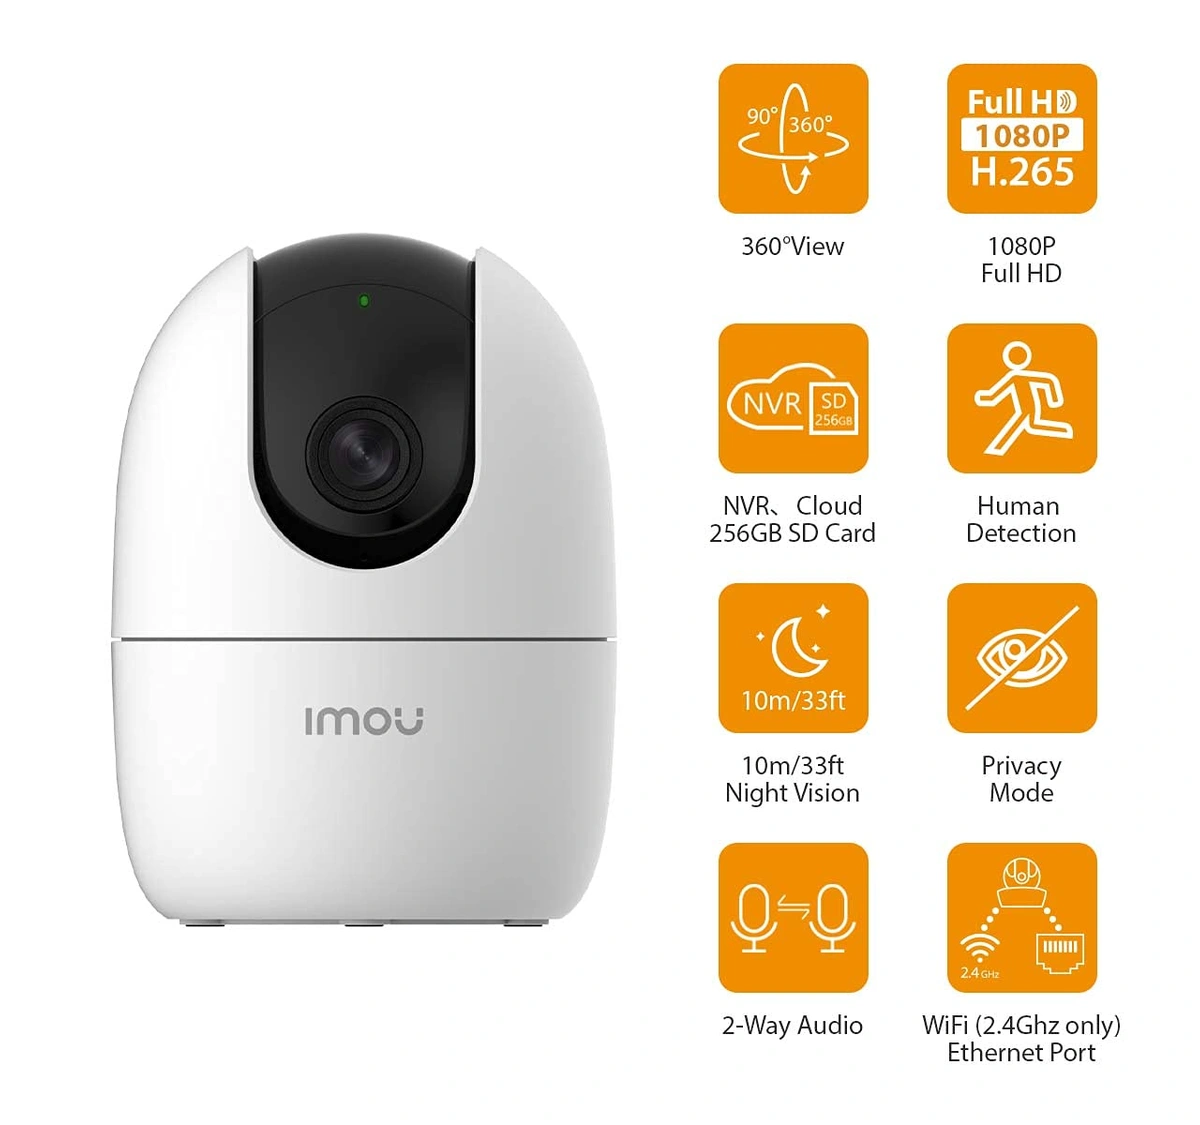 IMOU Ranger 2C-D Indoor Security Camera 1080p WiFi Camera 360 Night Vision